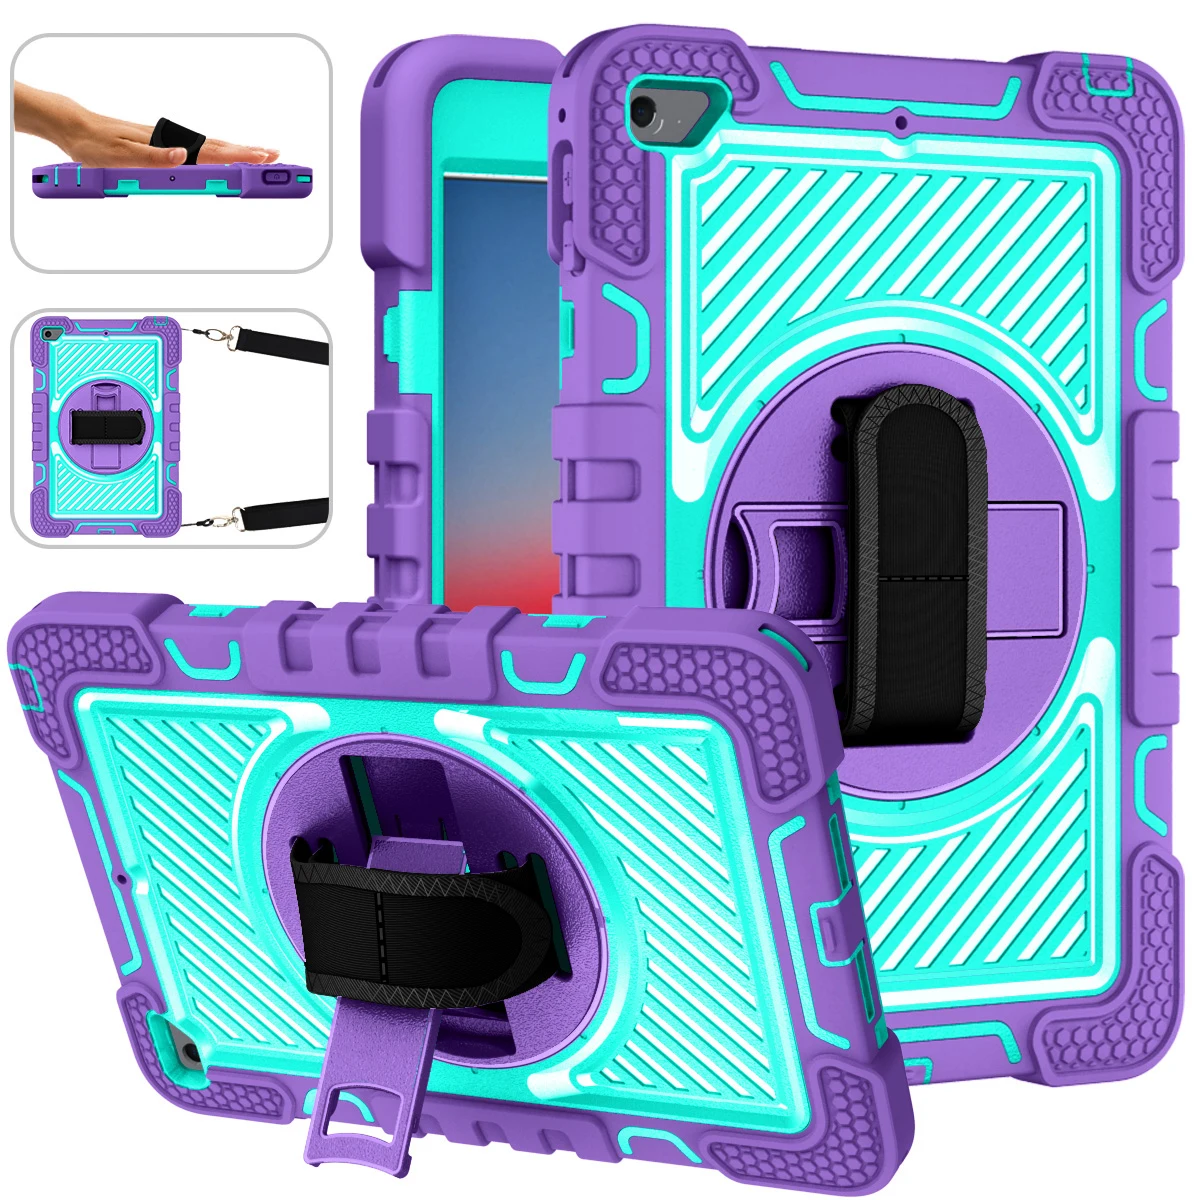 Case For IPad Mini 4 5 6 9.7 Air4 10.2 Pro11 Air 2 New Generation Shockproof Kid's Tablet Sleeve Hand With Stand Rotatable Cover